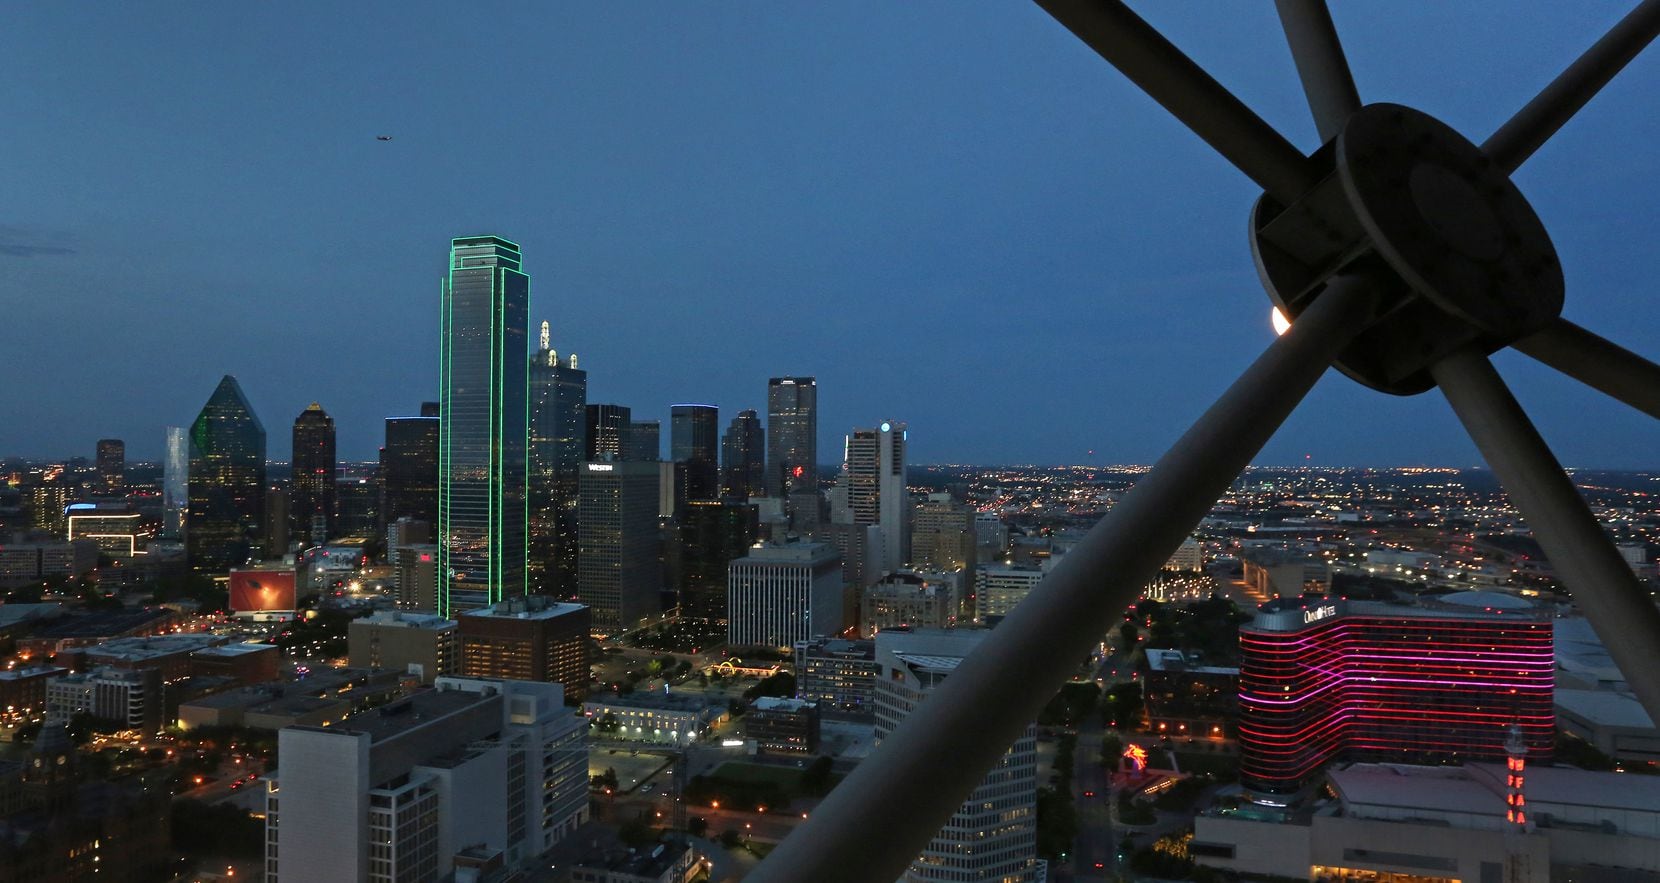 The best view of downtown Dallas is from the Geo Deck at Reunion Tower.